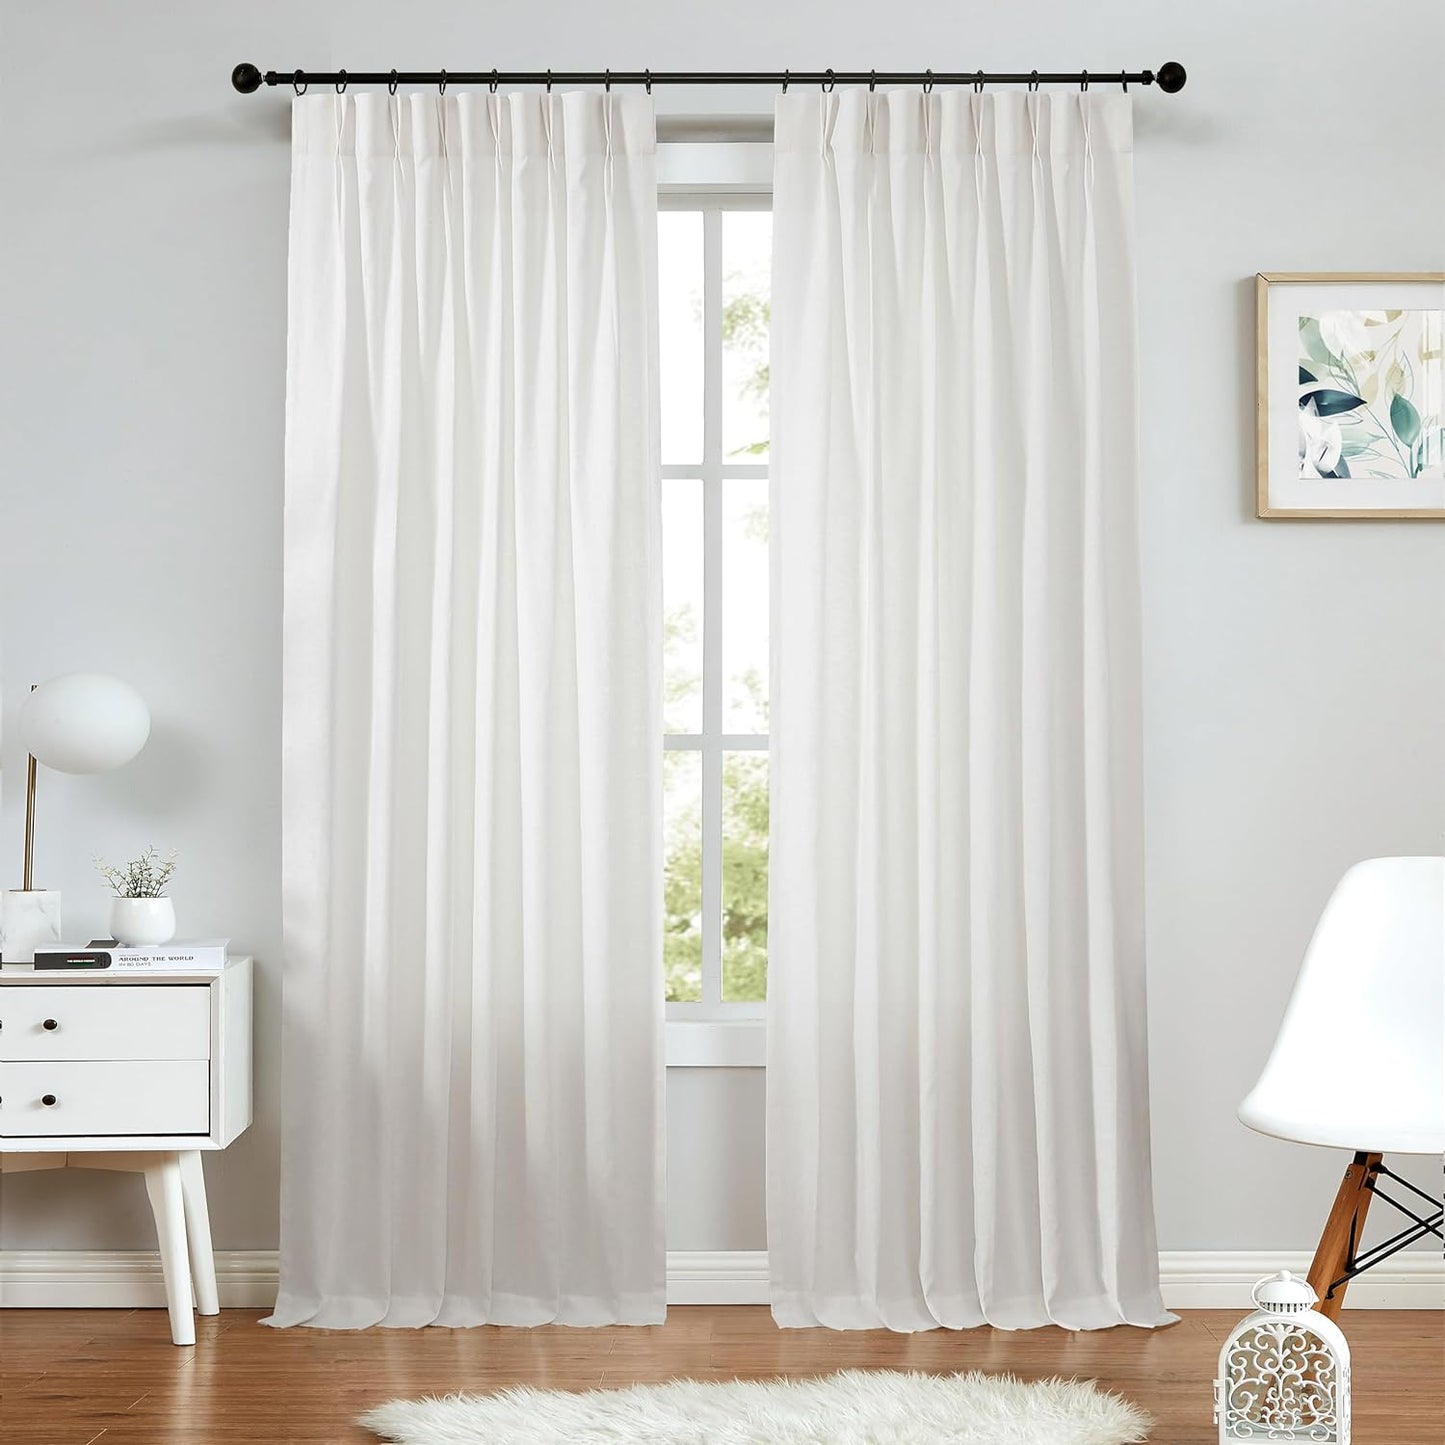 White Pinch Pleated Curtain Semi Sheer Curtain Panel Linen Cotton Blend Decorative Drape 84 Inches Long for Living Room Bedroom Farmhouse Rustic Window Treatment, White, 34"X84"X2  Central Park White 34"X95"X2 